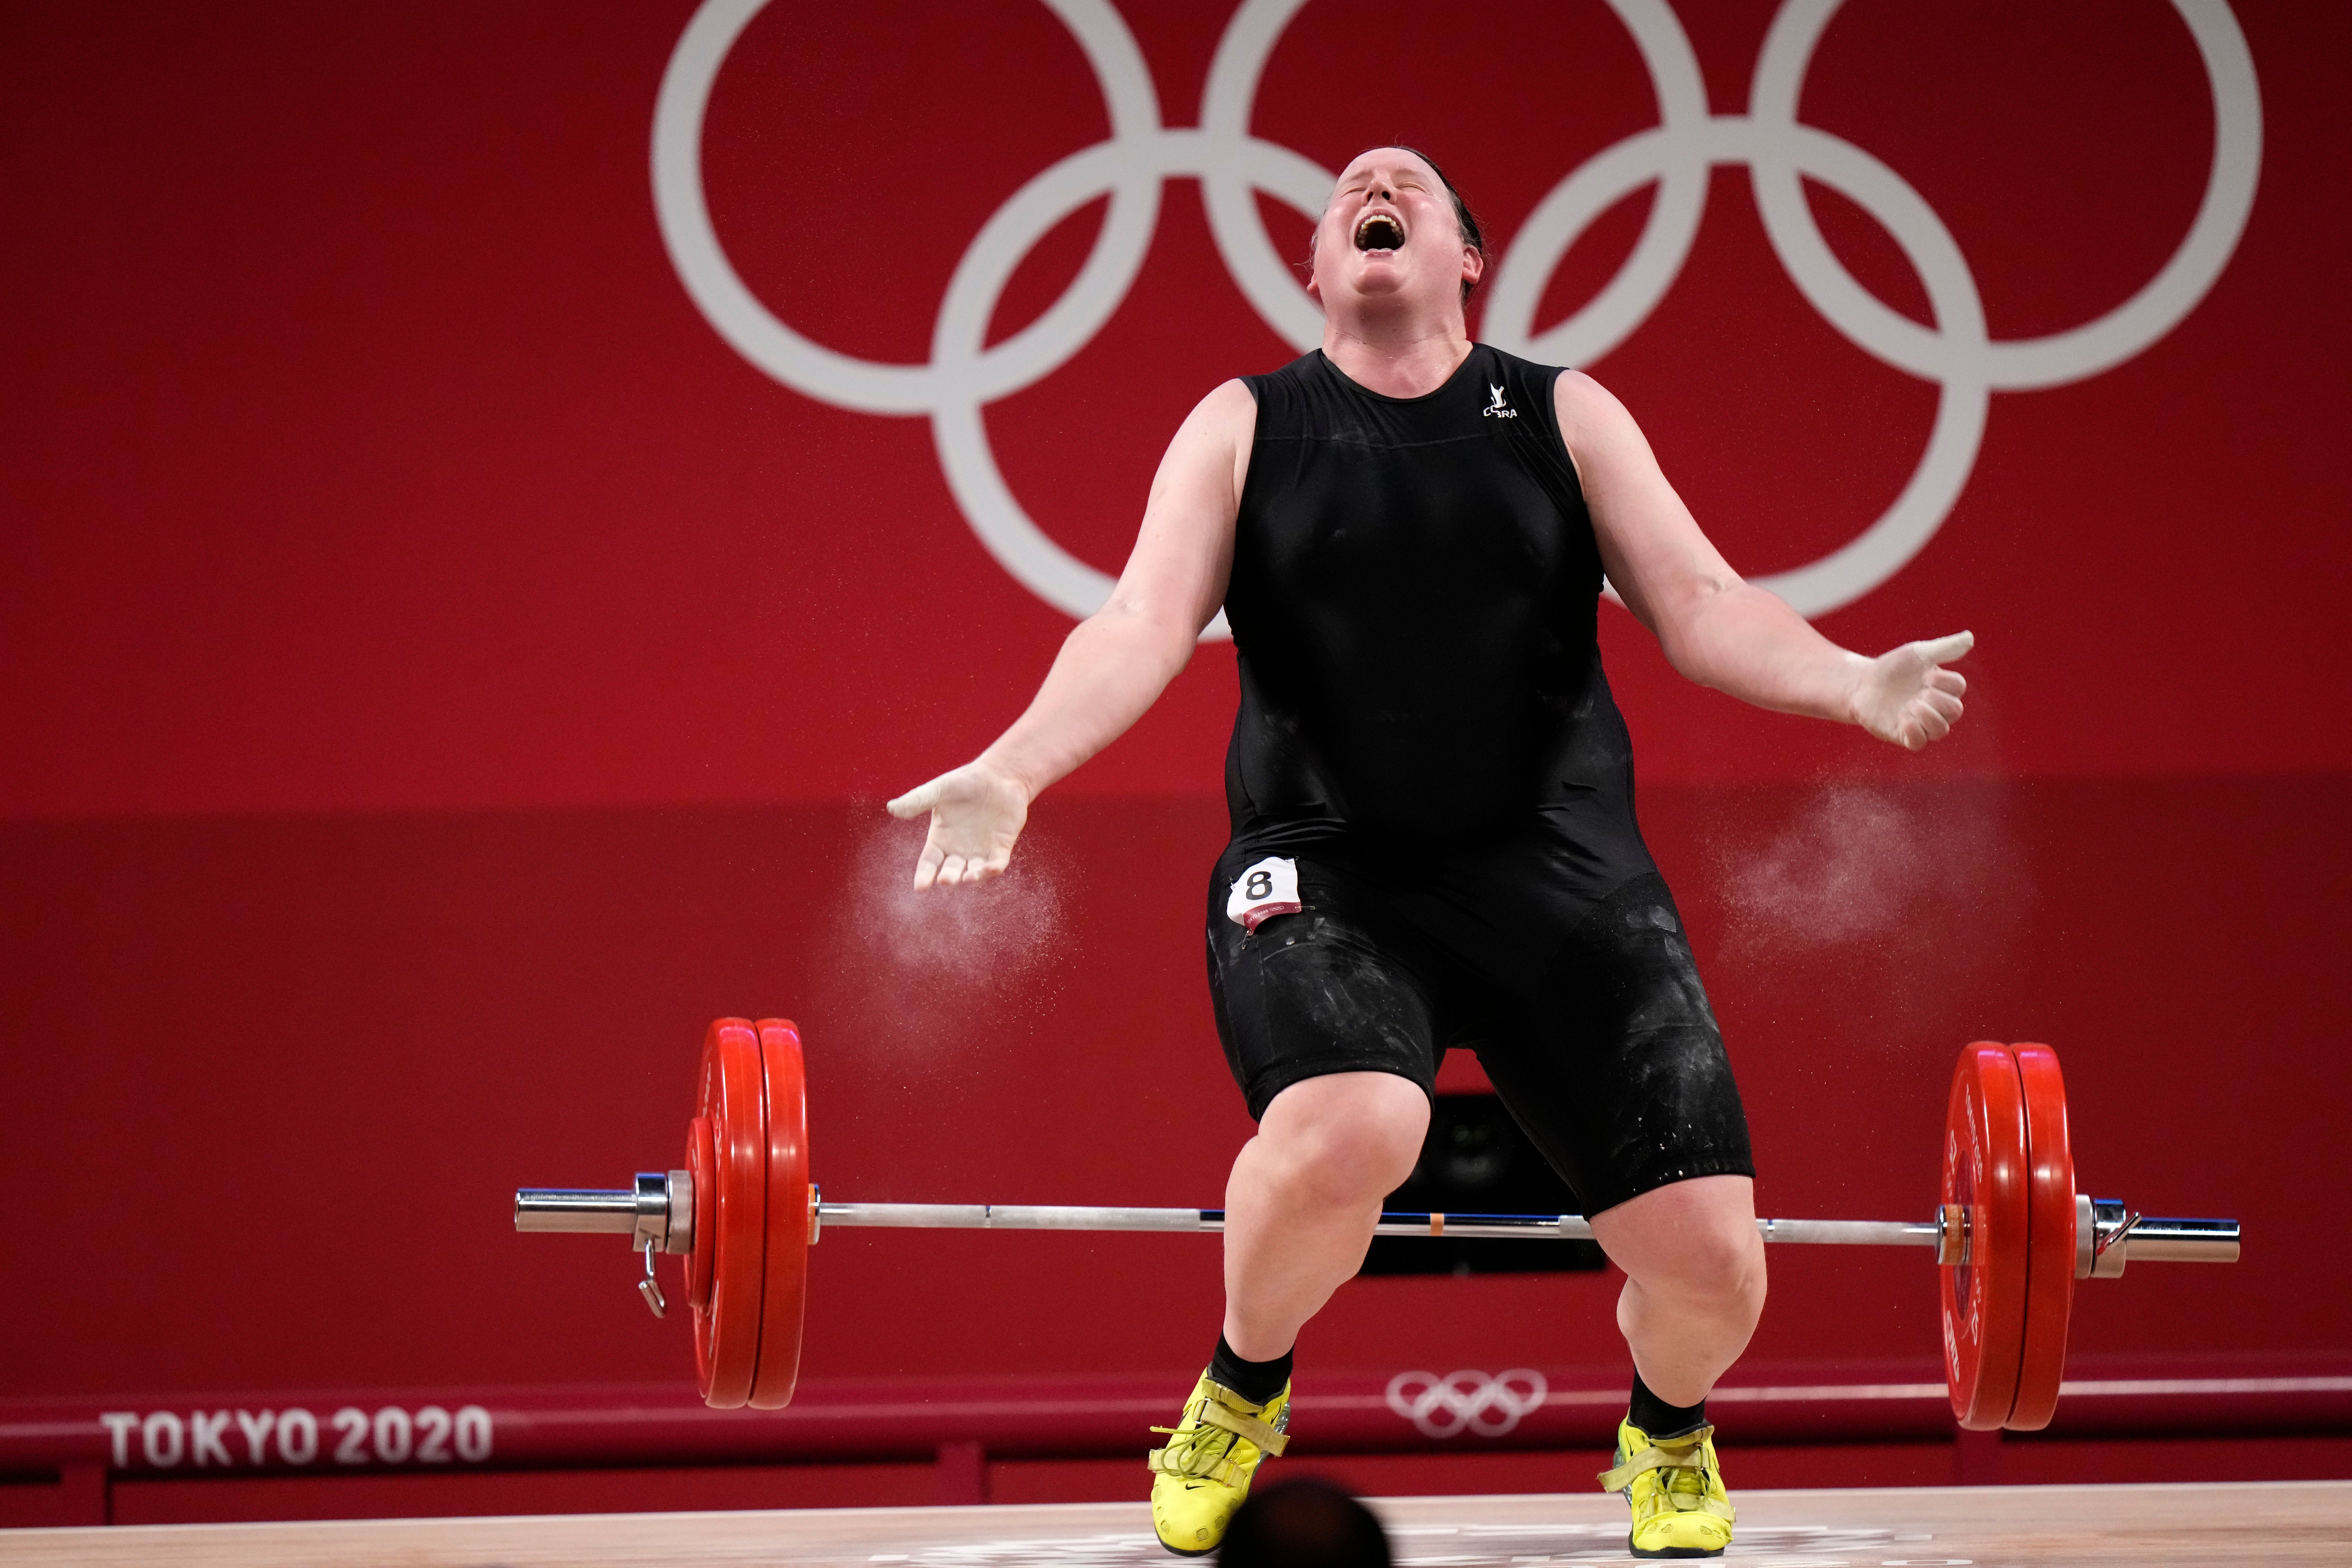 Laurel Hubbard competing in the women’s +87kg weightlifting final